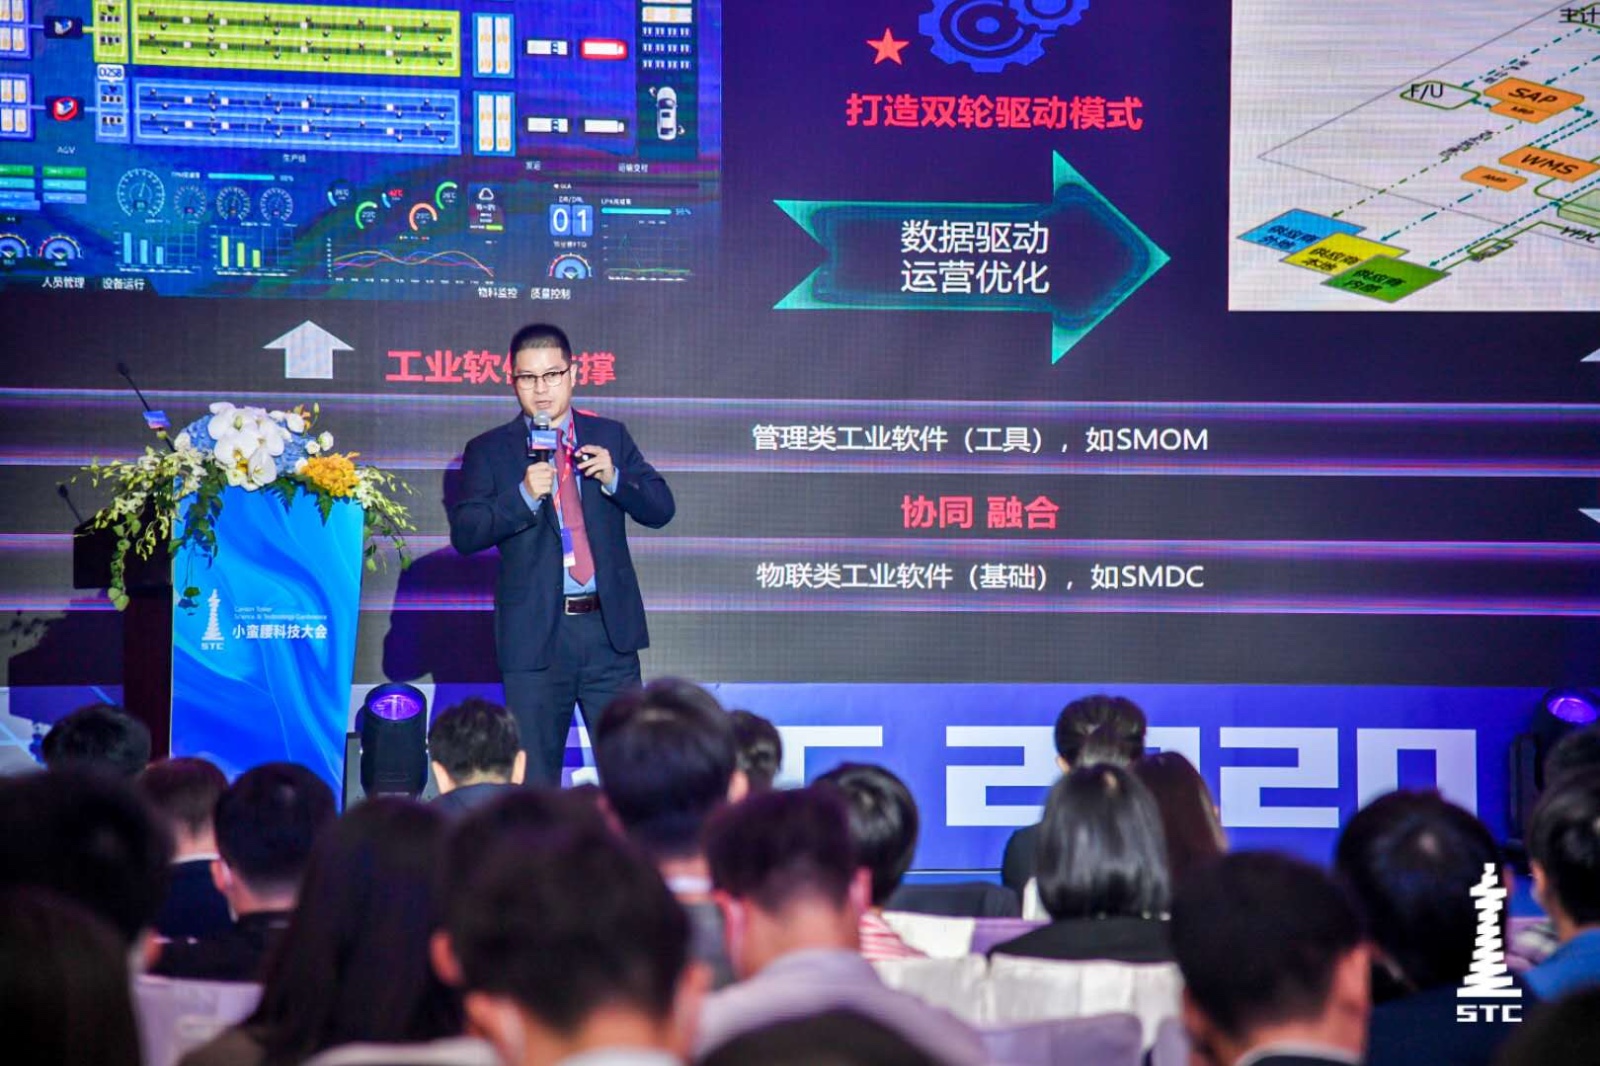 2020 Xiaomanyao Technology Conference | Saiyi Information and Major Experts' Discussion on Industria